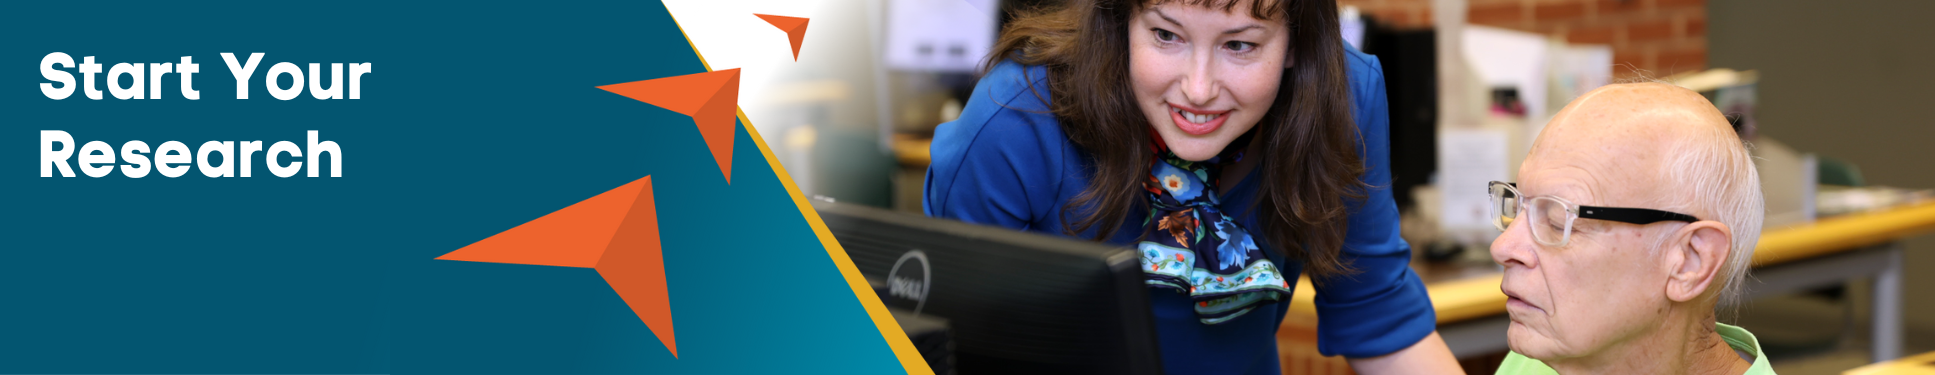 Start Your Research banner with three orange arrows pointing to image of a person helping another person at a computer. 